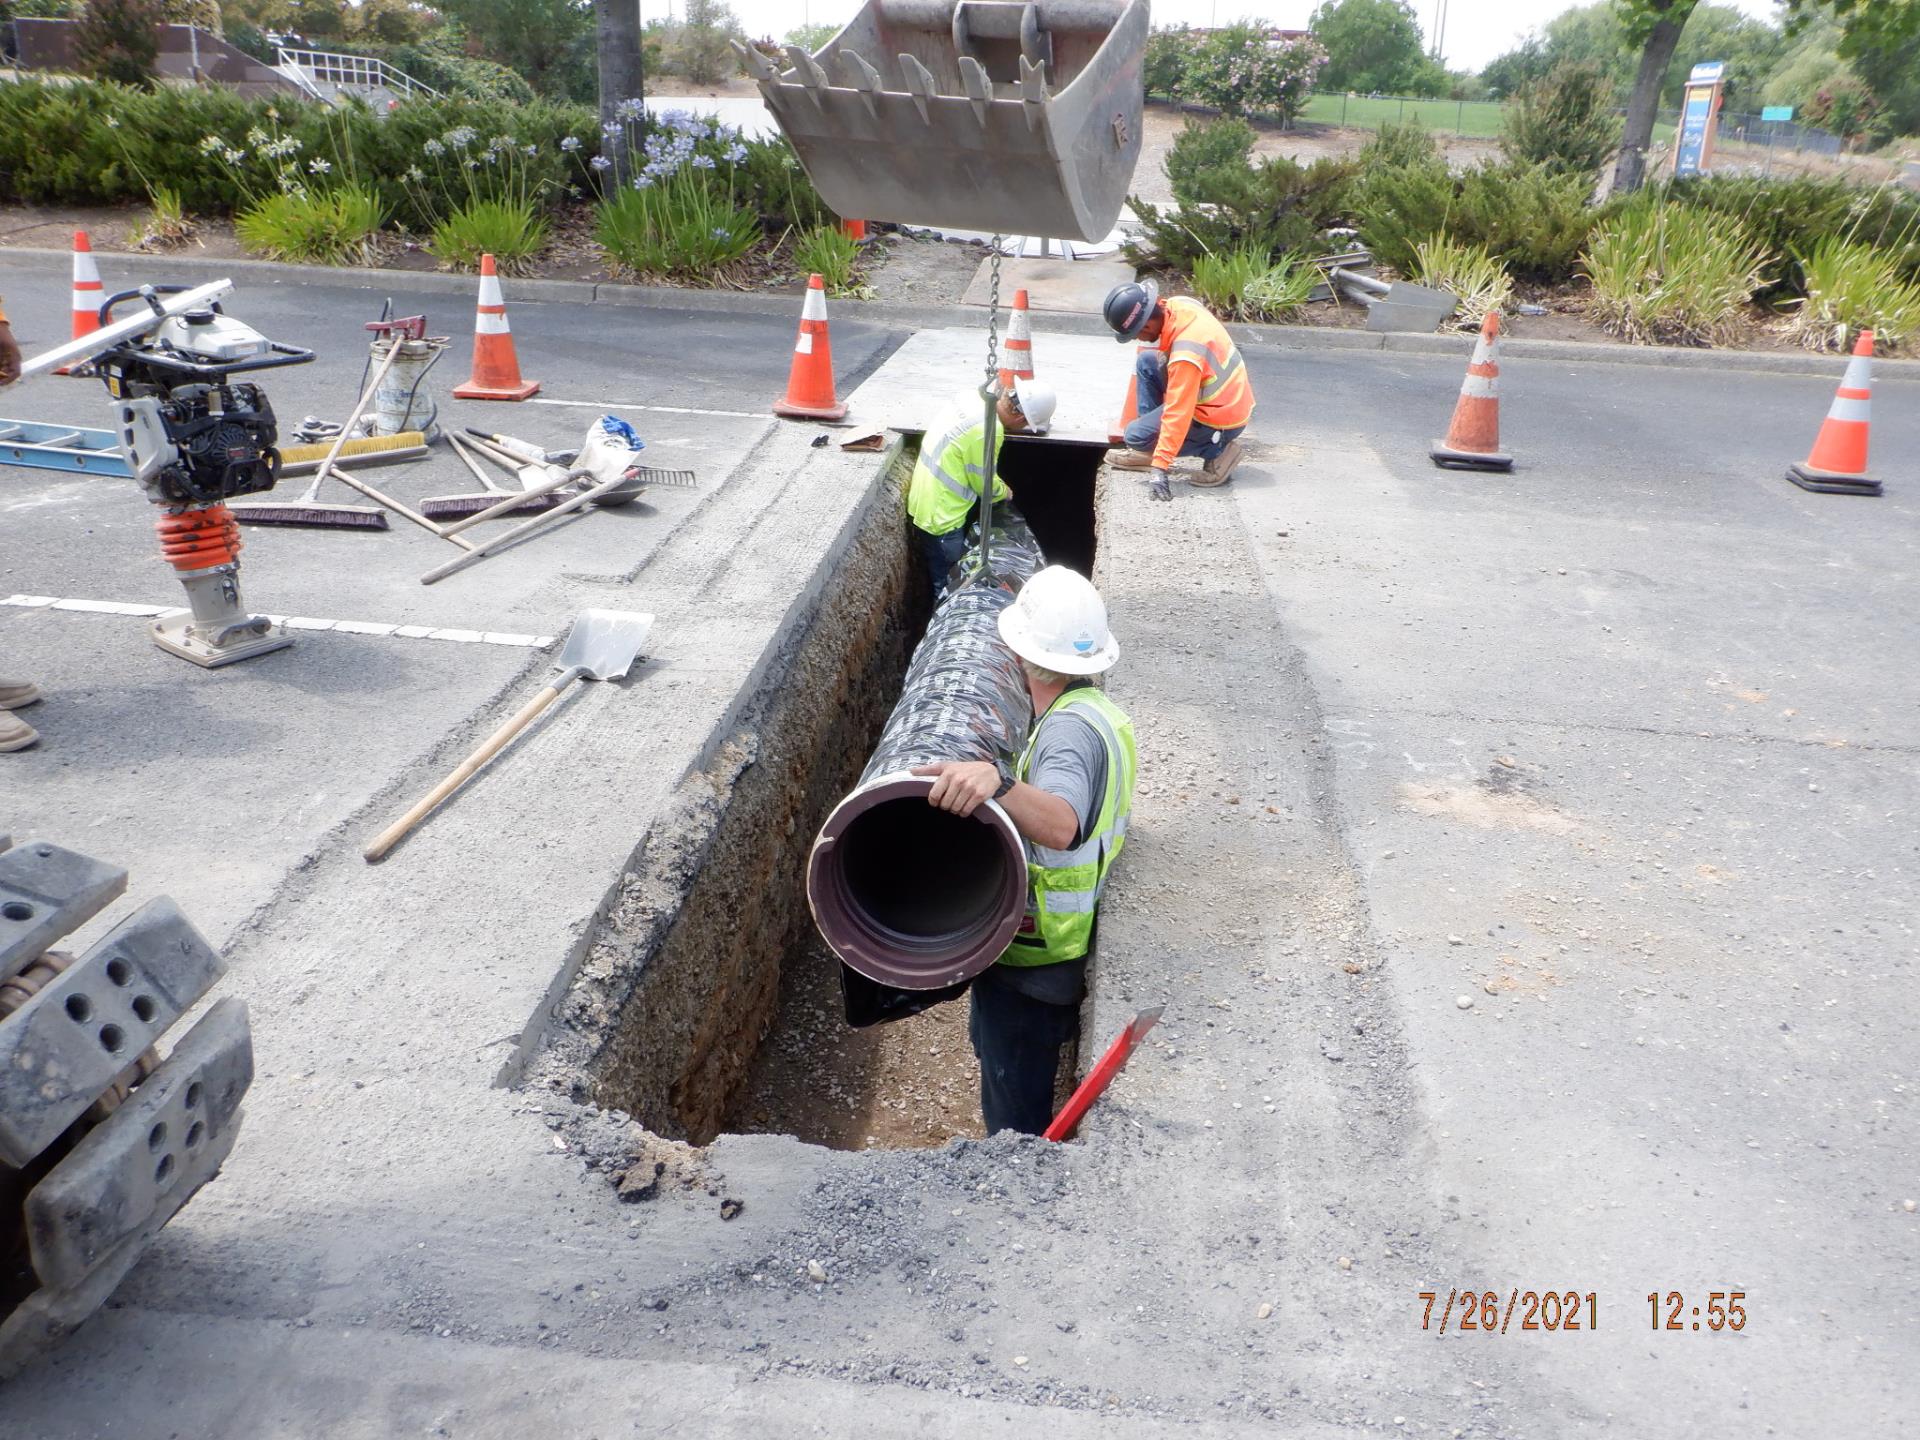 Street workers fixing an underground pipe on a road with construction tools, cones, and three workers with hard hats and reflective vests. Plants and grassy areas in the background 